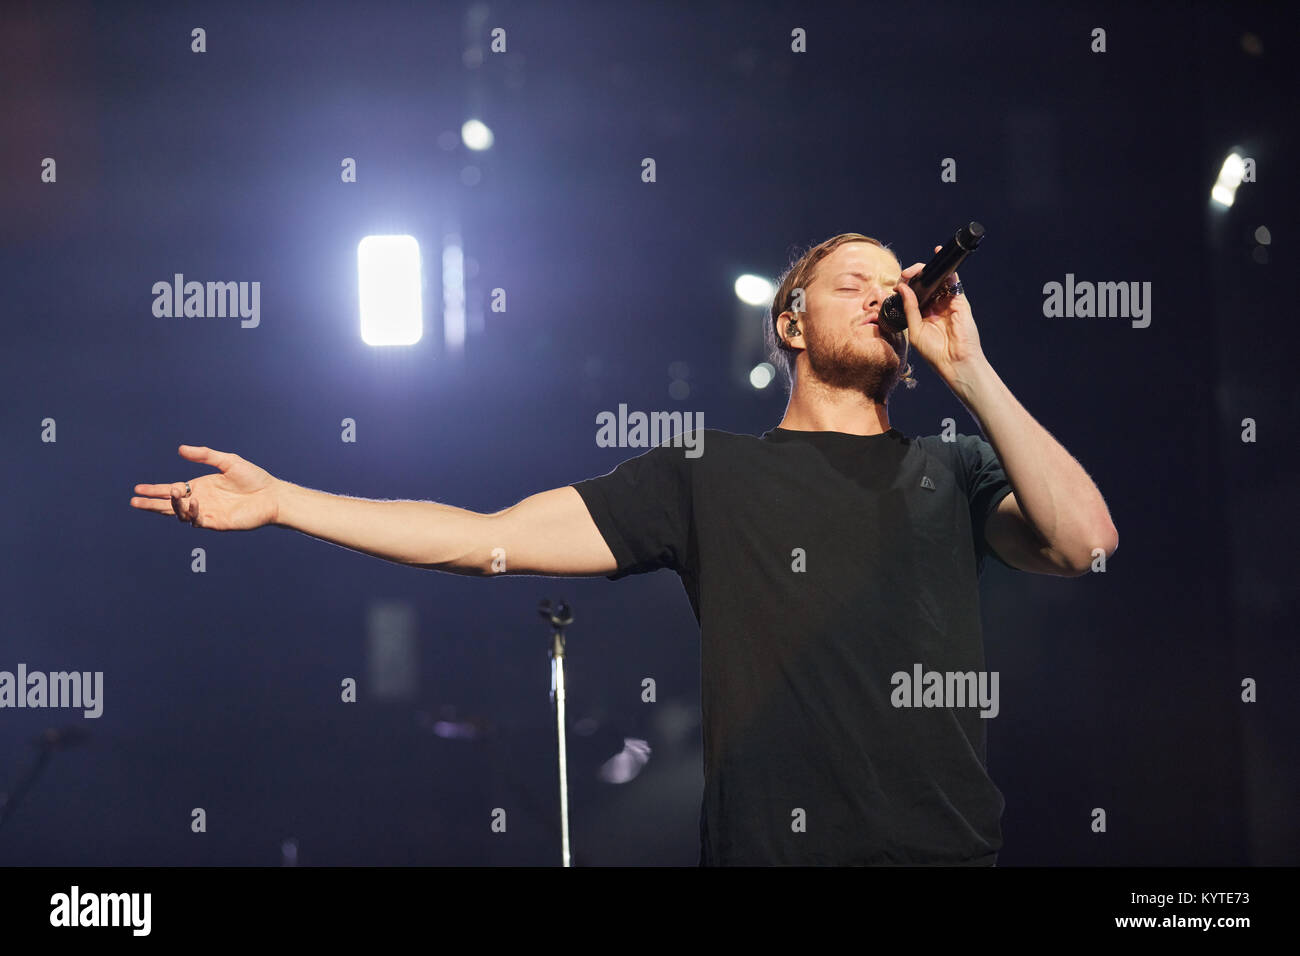 The American rock band Imagine Dragons performs a live concert at Spektrum in Oslo. Here lead singer and songwriter Dan Reynolds is seen live on stage. Norway, 20/10 2015. Stock Photo